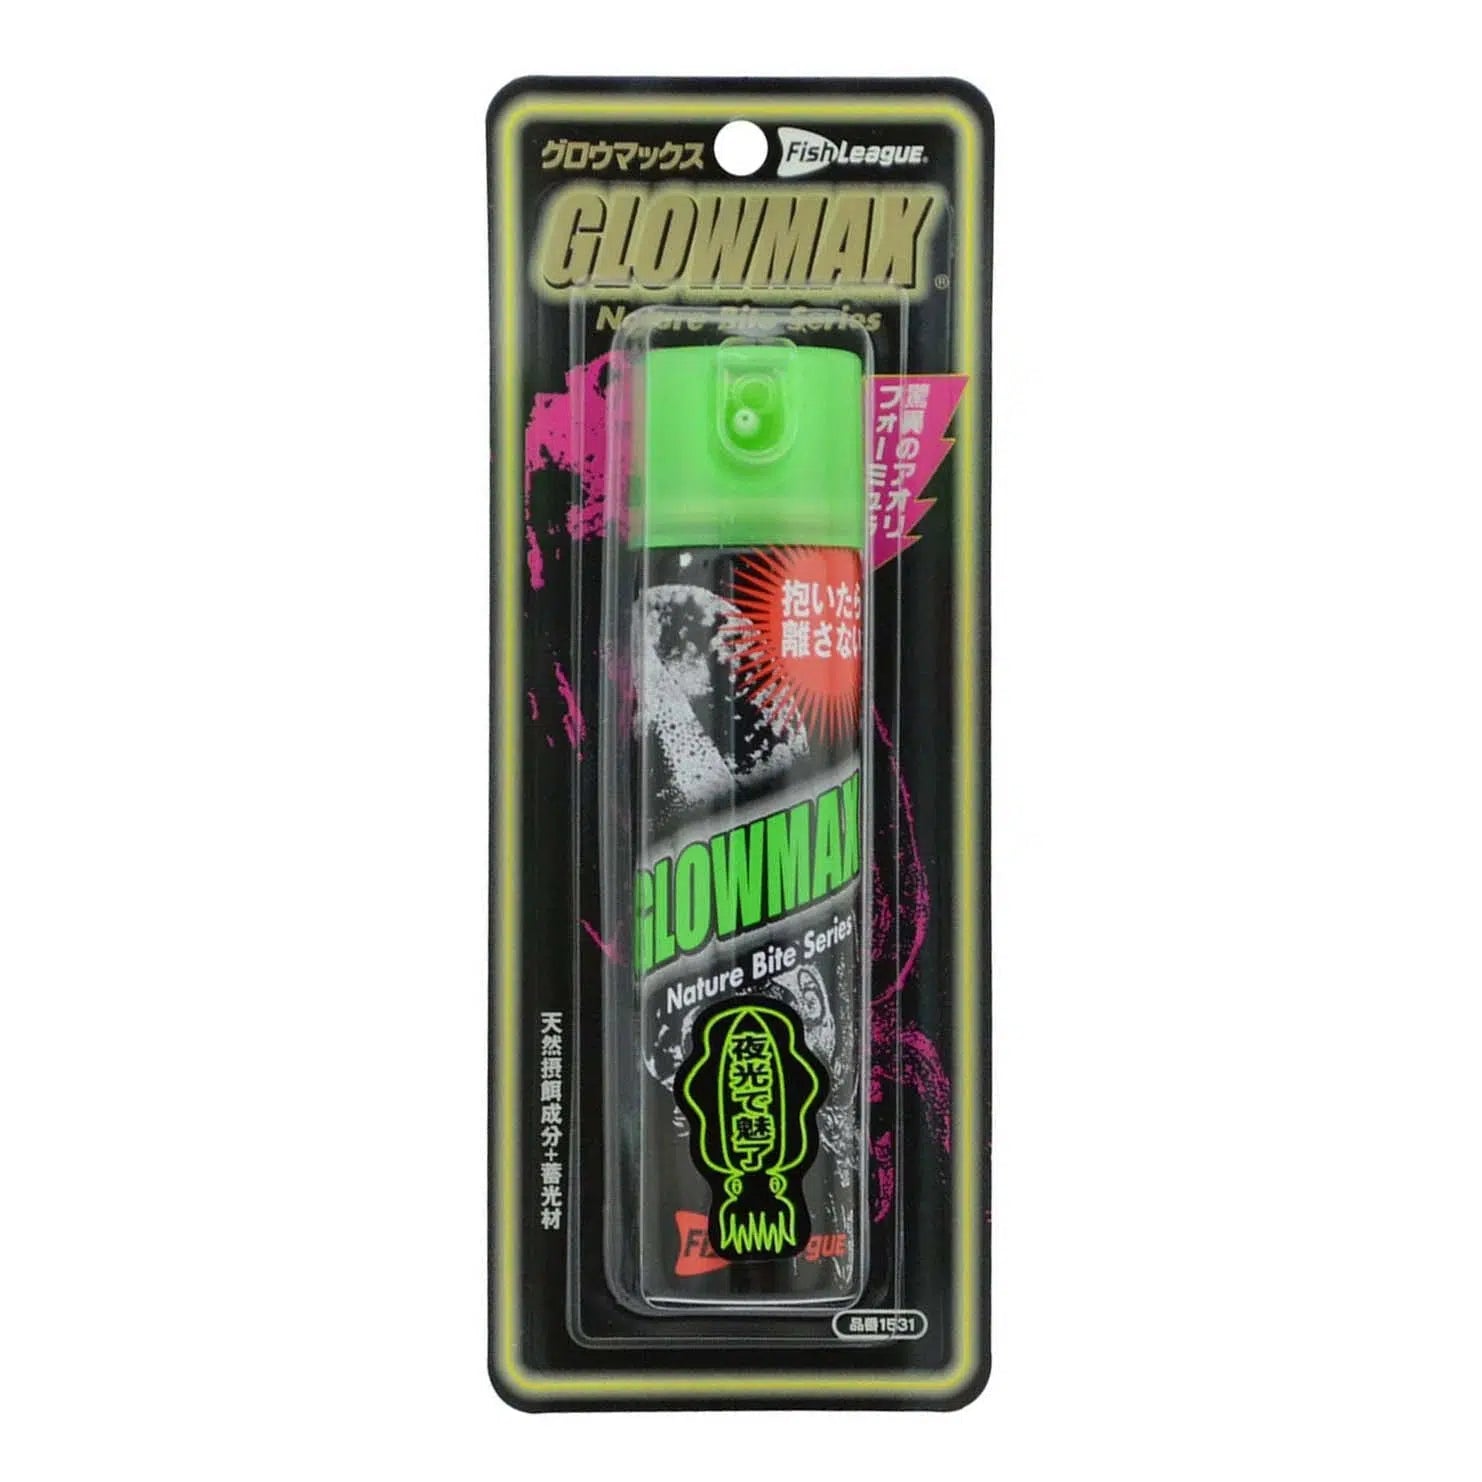 Glowmax Scent 80ml Lure Spray-Fish Attractants & Scents-Fish League-Fishing Station